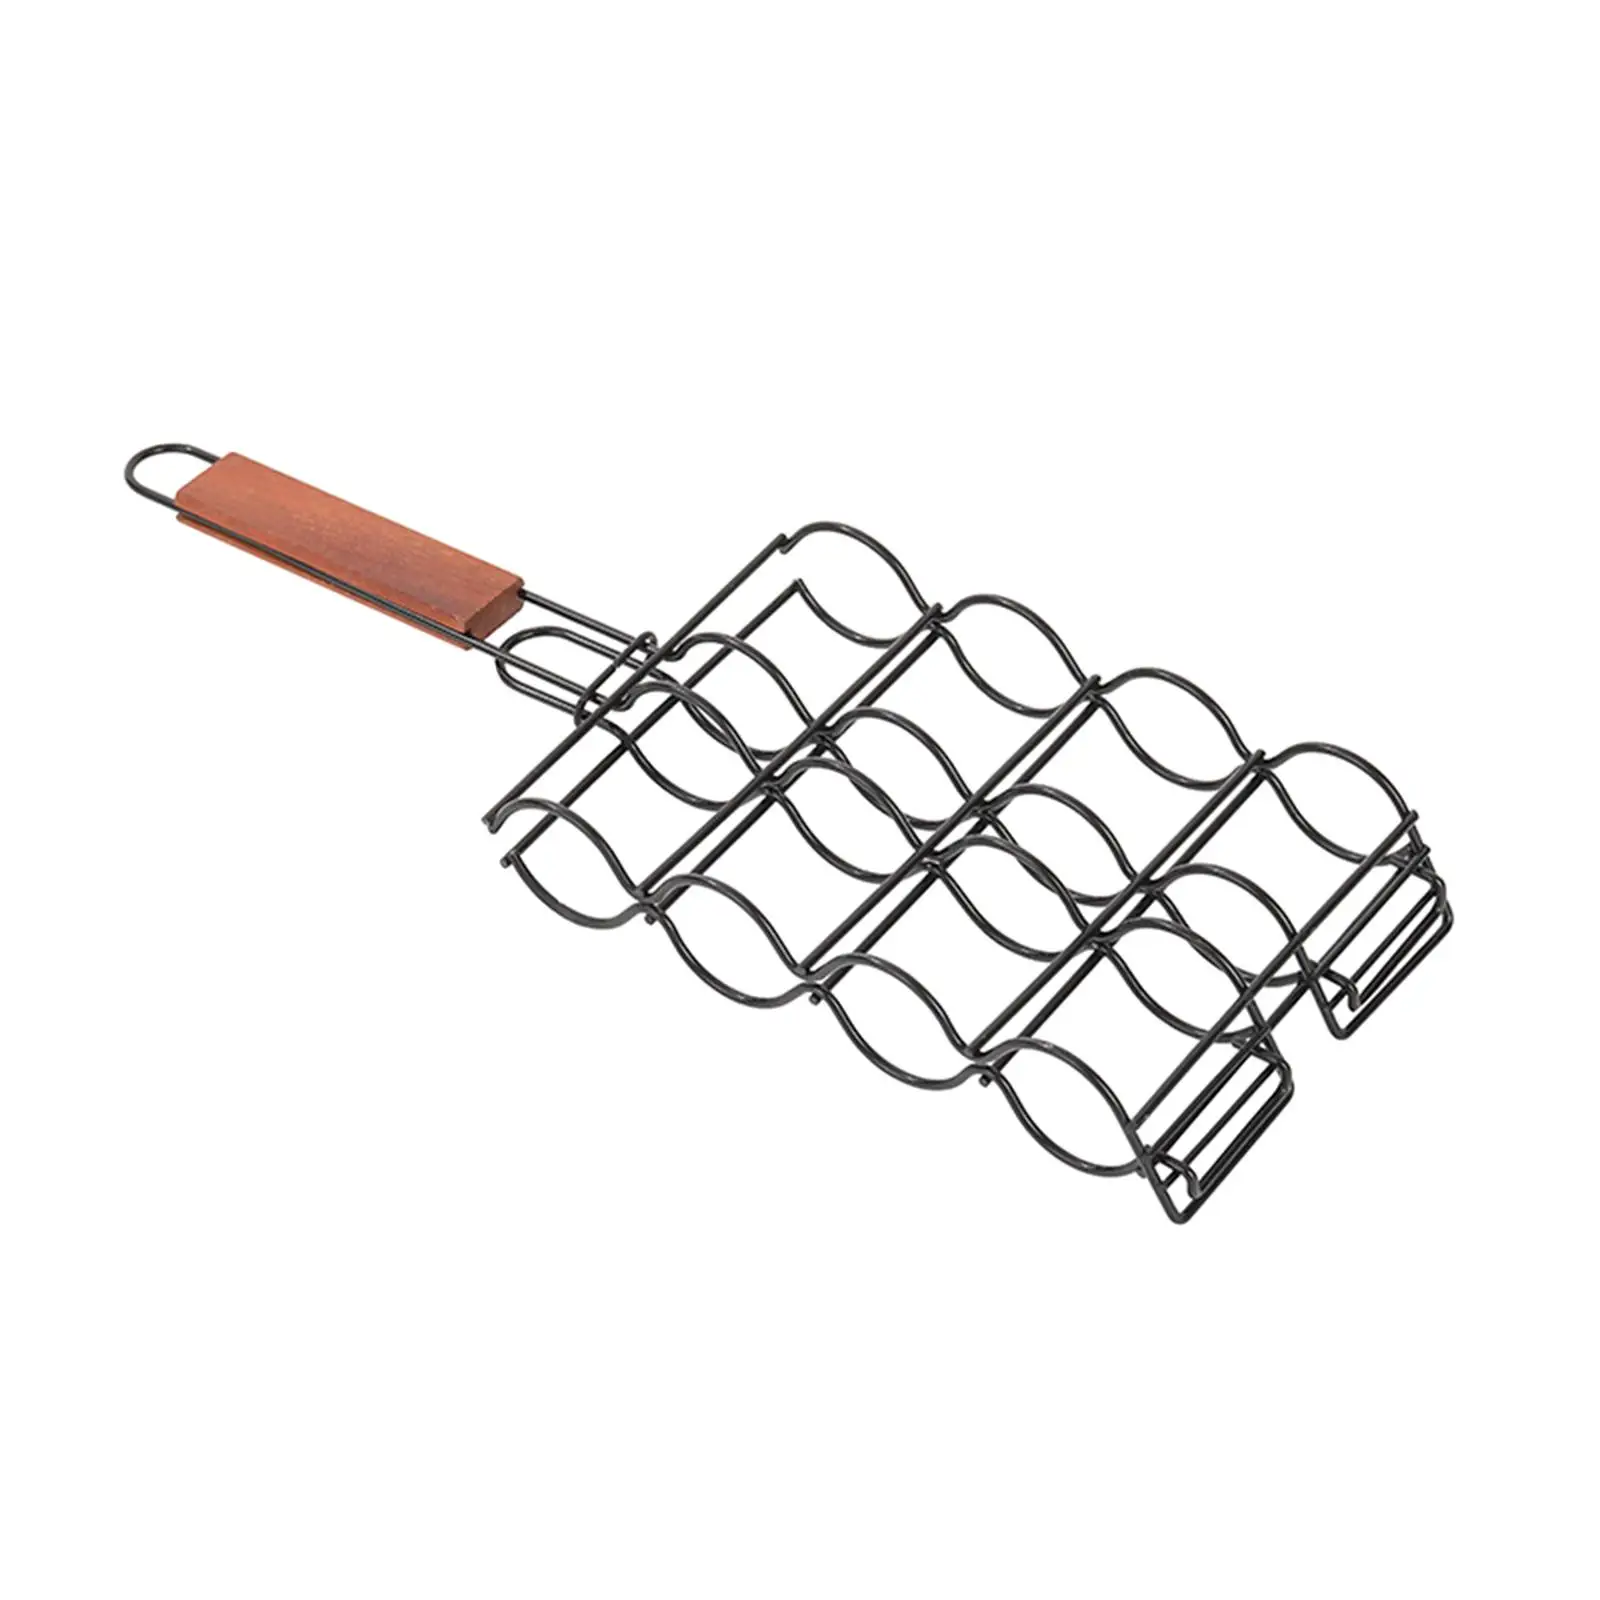 

Barbecue Corn Holder Sausage Grilling Basket Portable with Handle Barbecue Grill Basket Accessories Tools for Backyard Parties